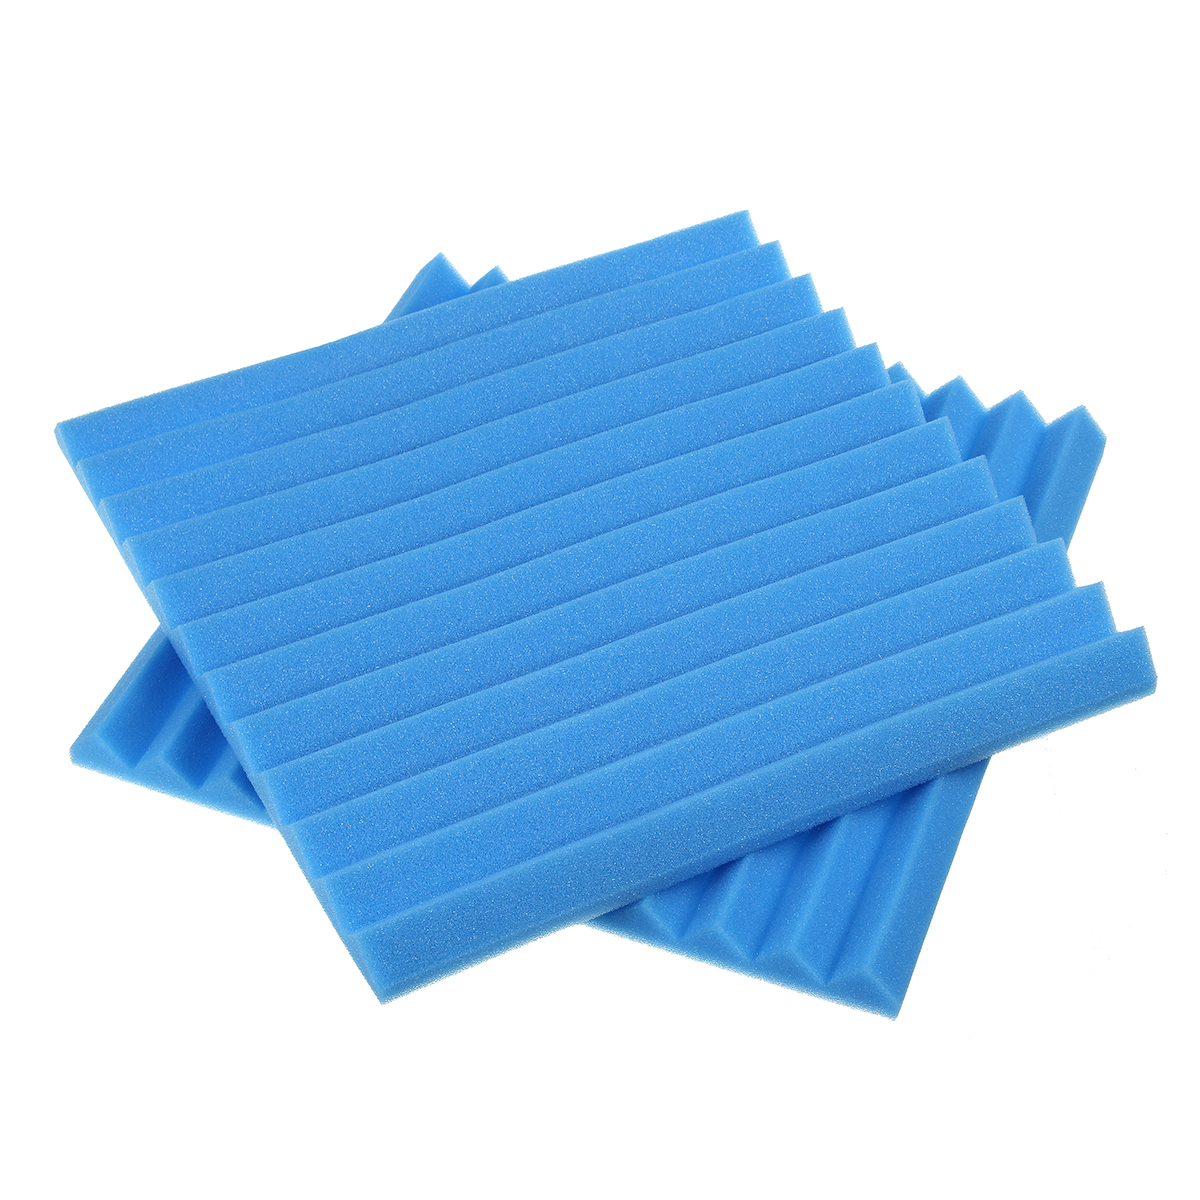 Find 12Pcs Wedge Acoustic Foam Panels 25mm Sound Proofing Foam Room Studio Tile Treatments for Sale on Gipsybee.com with cryptocurrencies